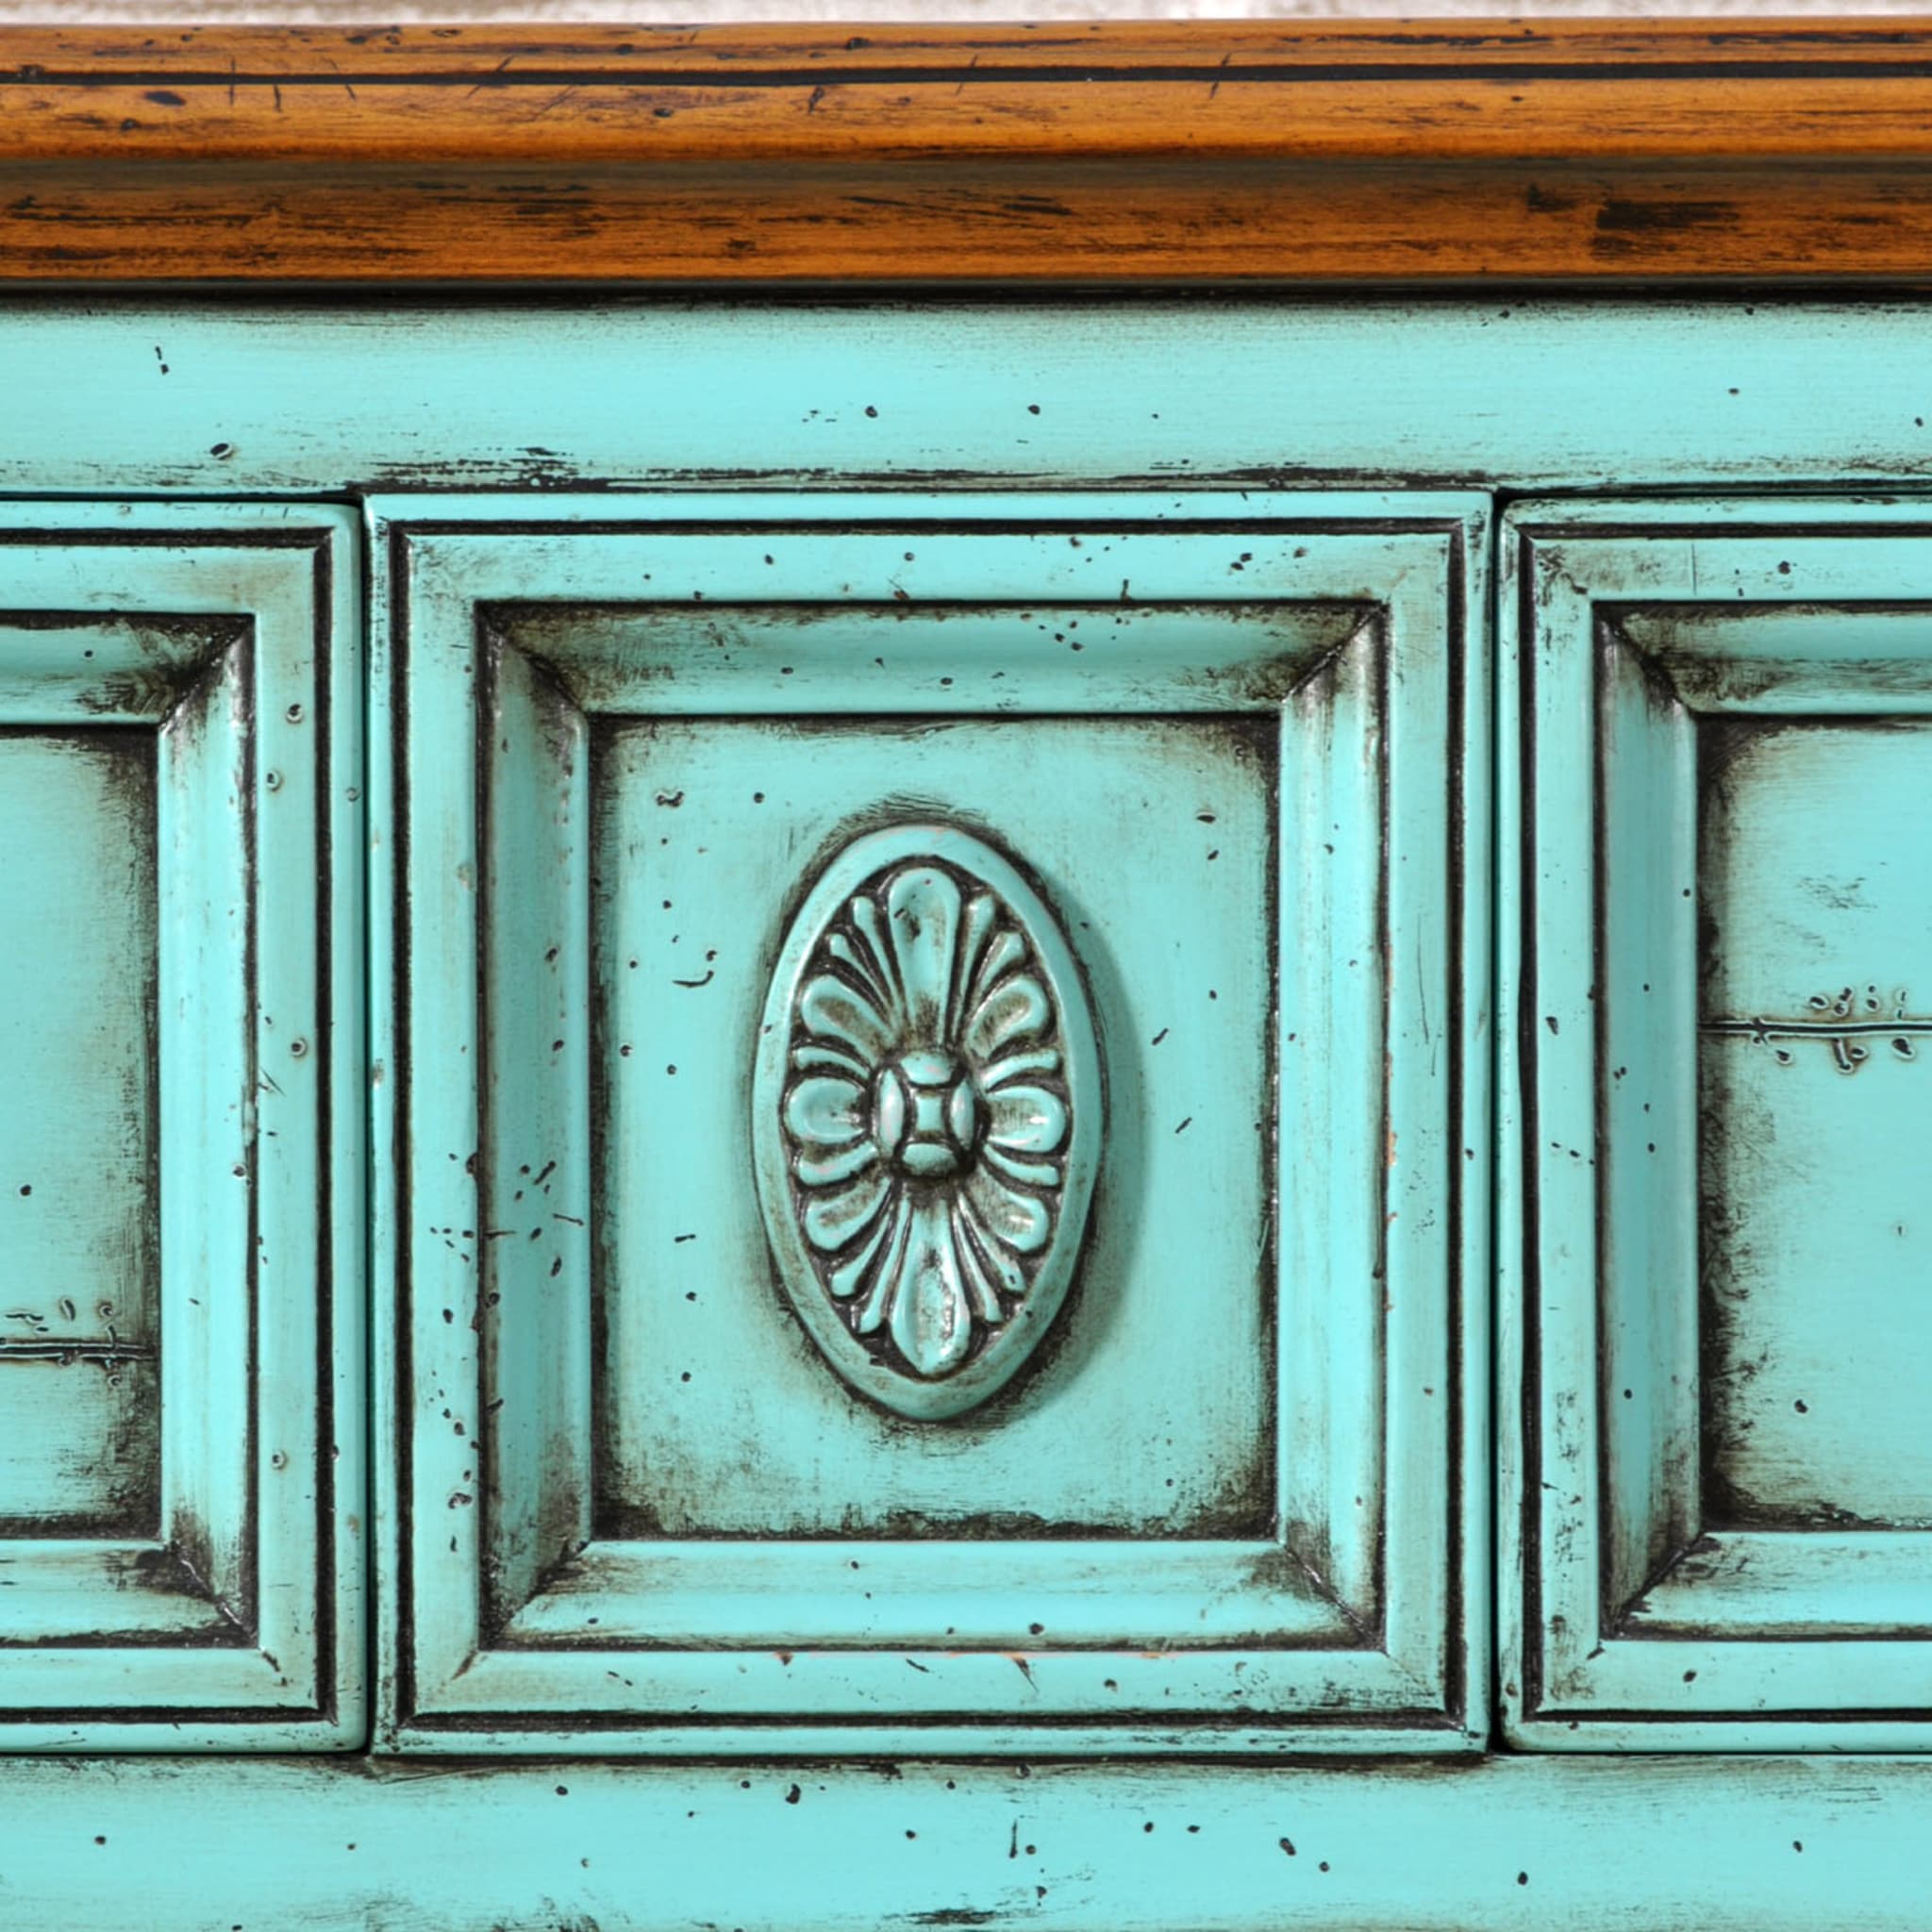 Impero '800 Empire-Style Turquoise Sideboard - Alternative view 3